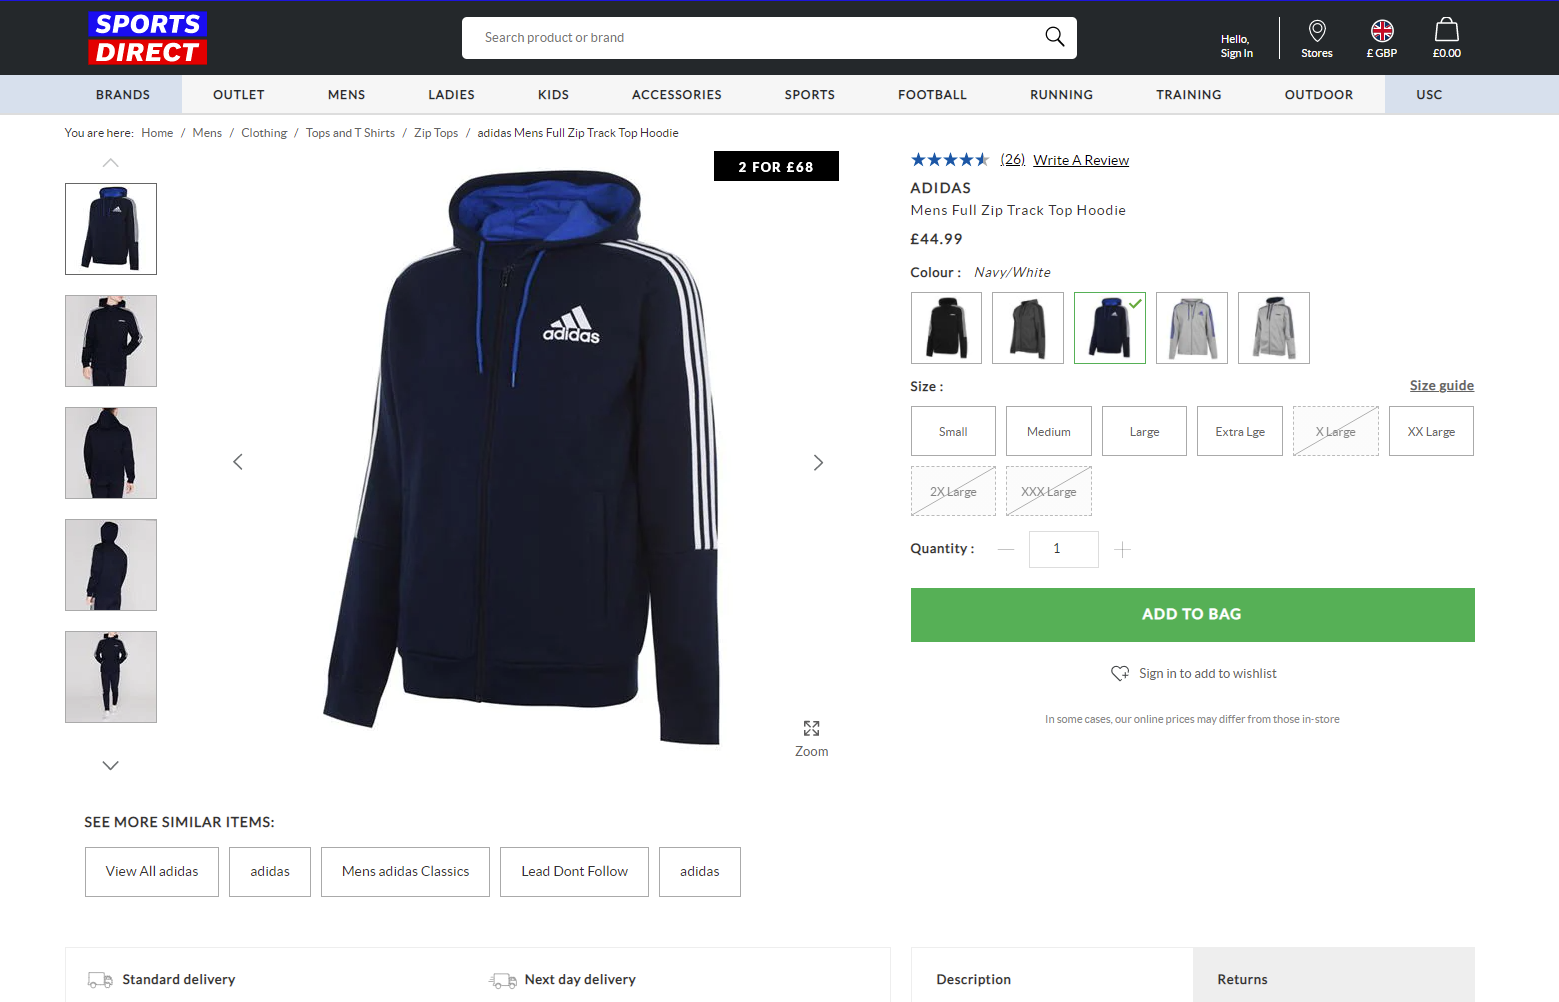 Take My Money: UX Practices on Product Page Design